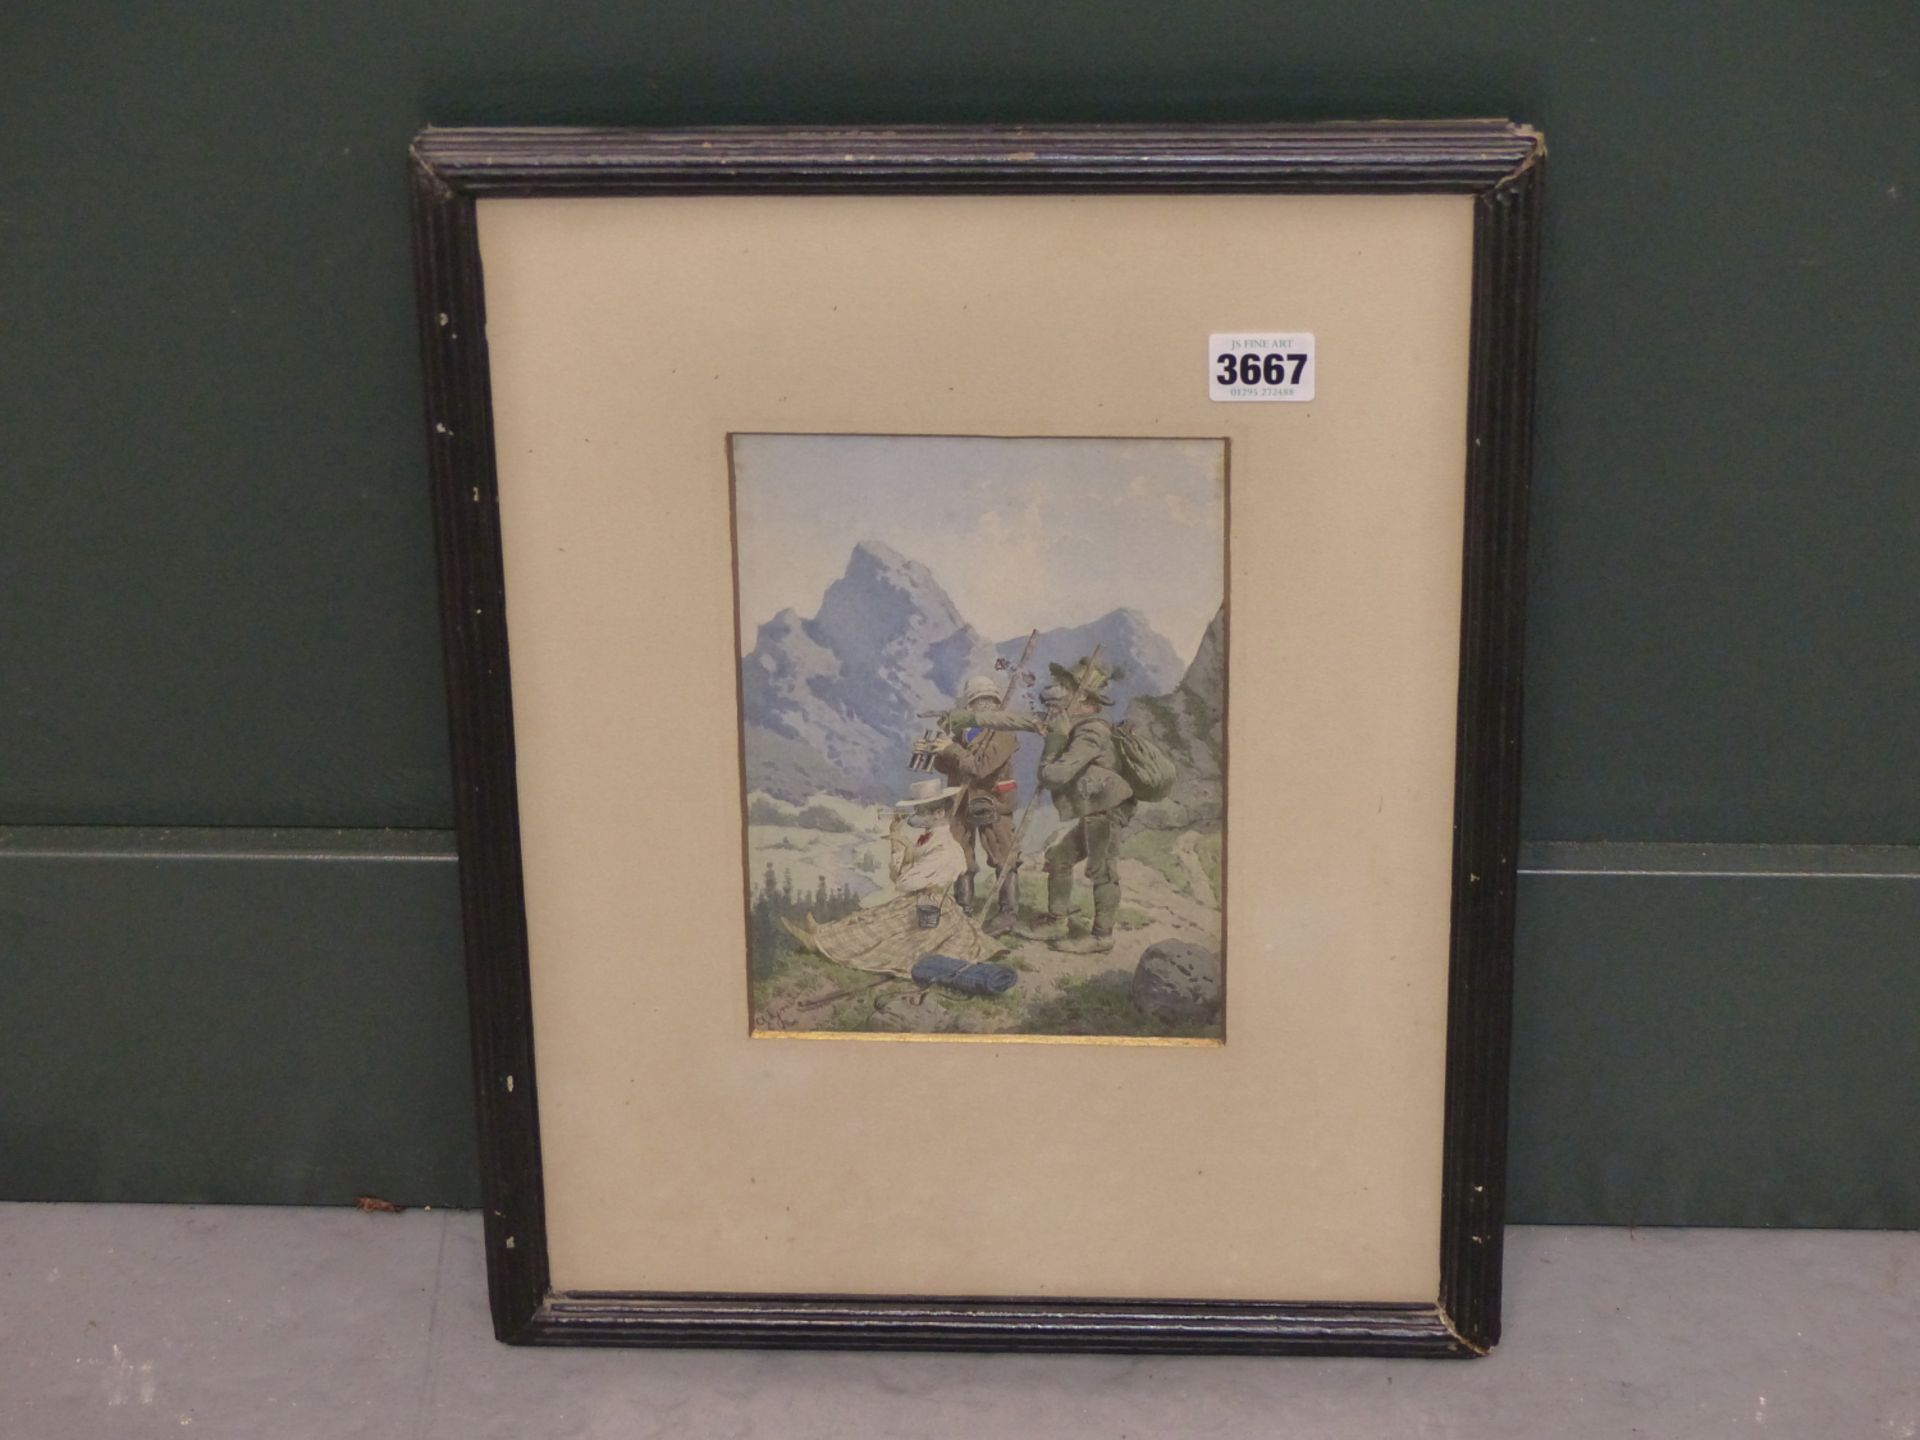 ALOIS GREIL (1842-1902), THREE ANTHROPOMORPHIC CLIMBERS IN THE AUSTRIAN ALPS. WATERCOLOUR, SIGNED - Image 7 of 8